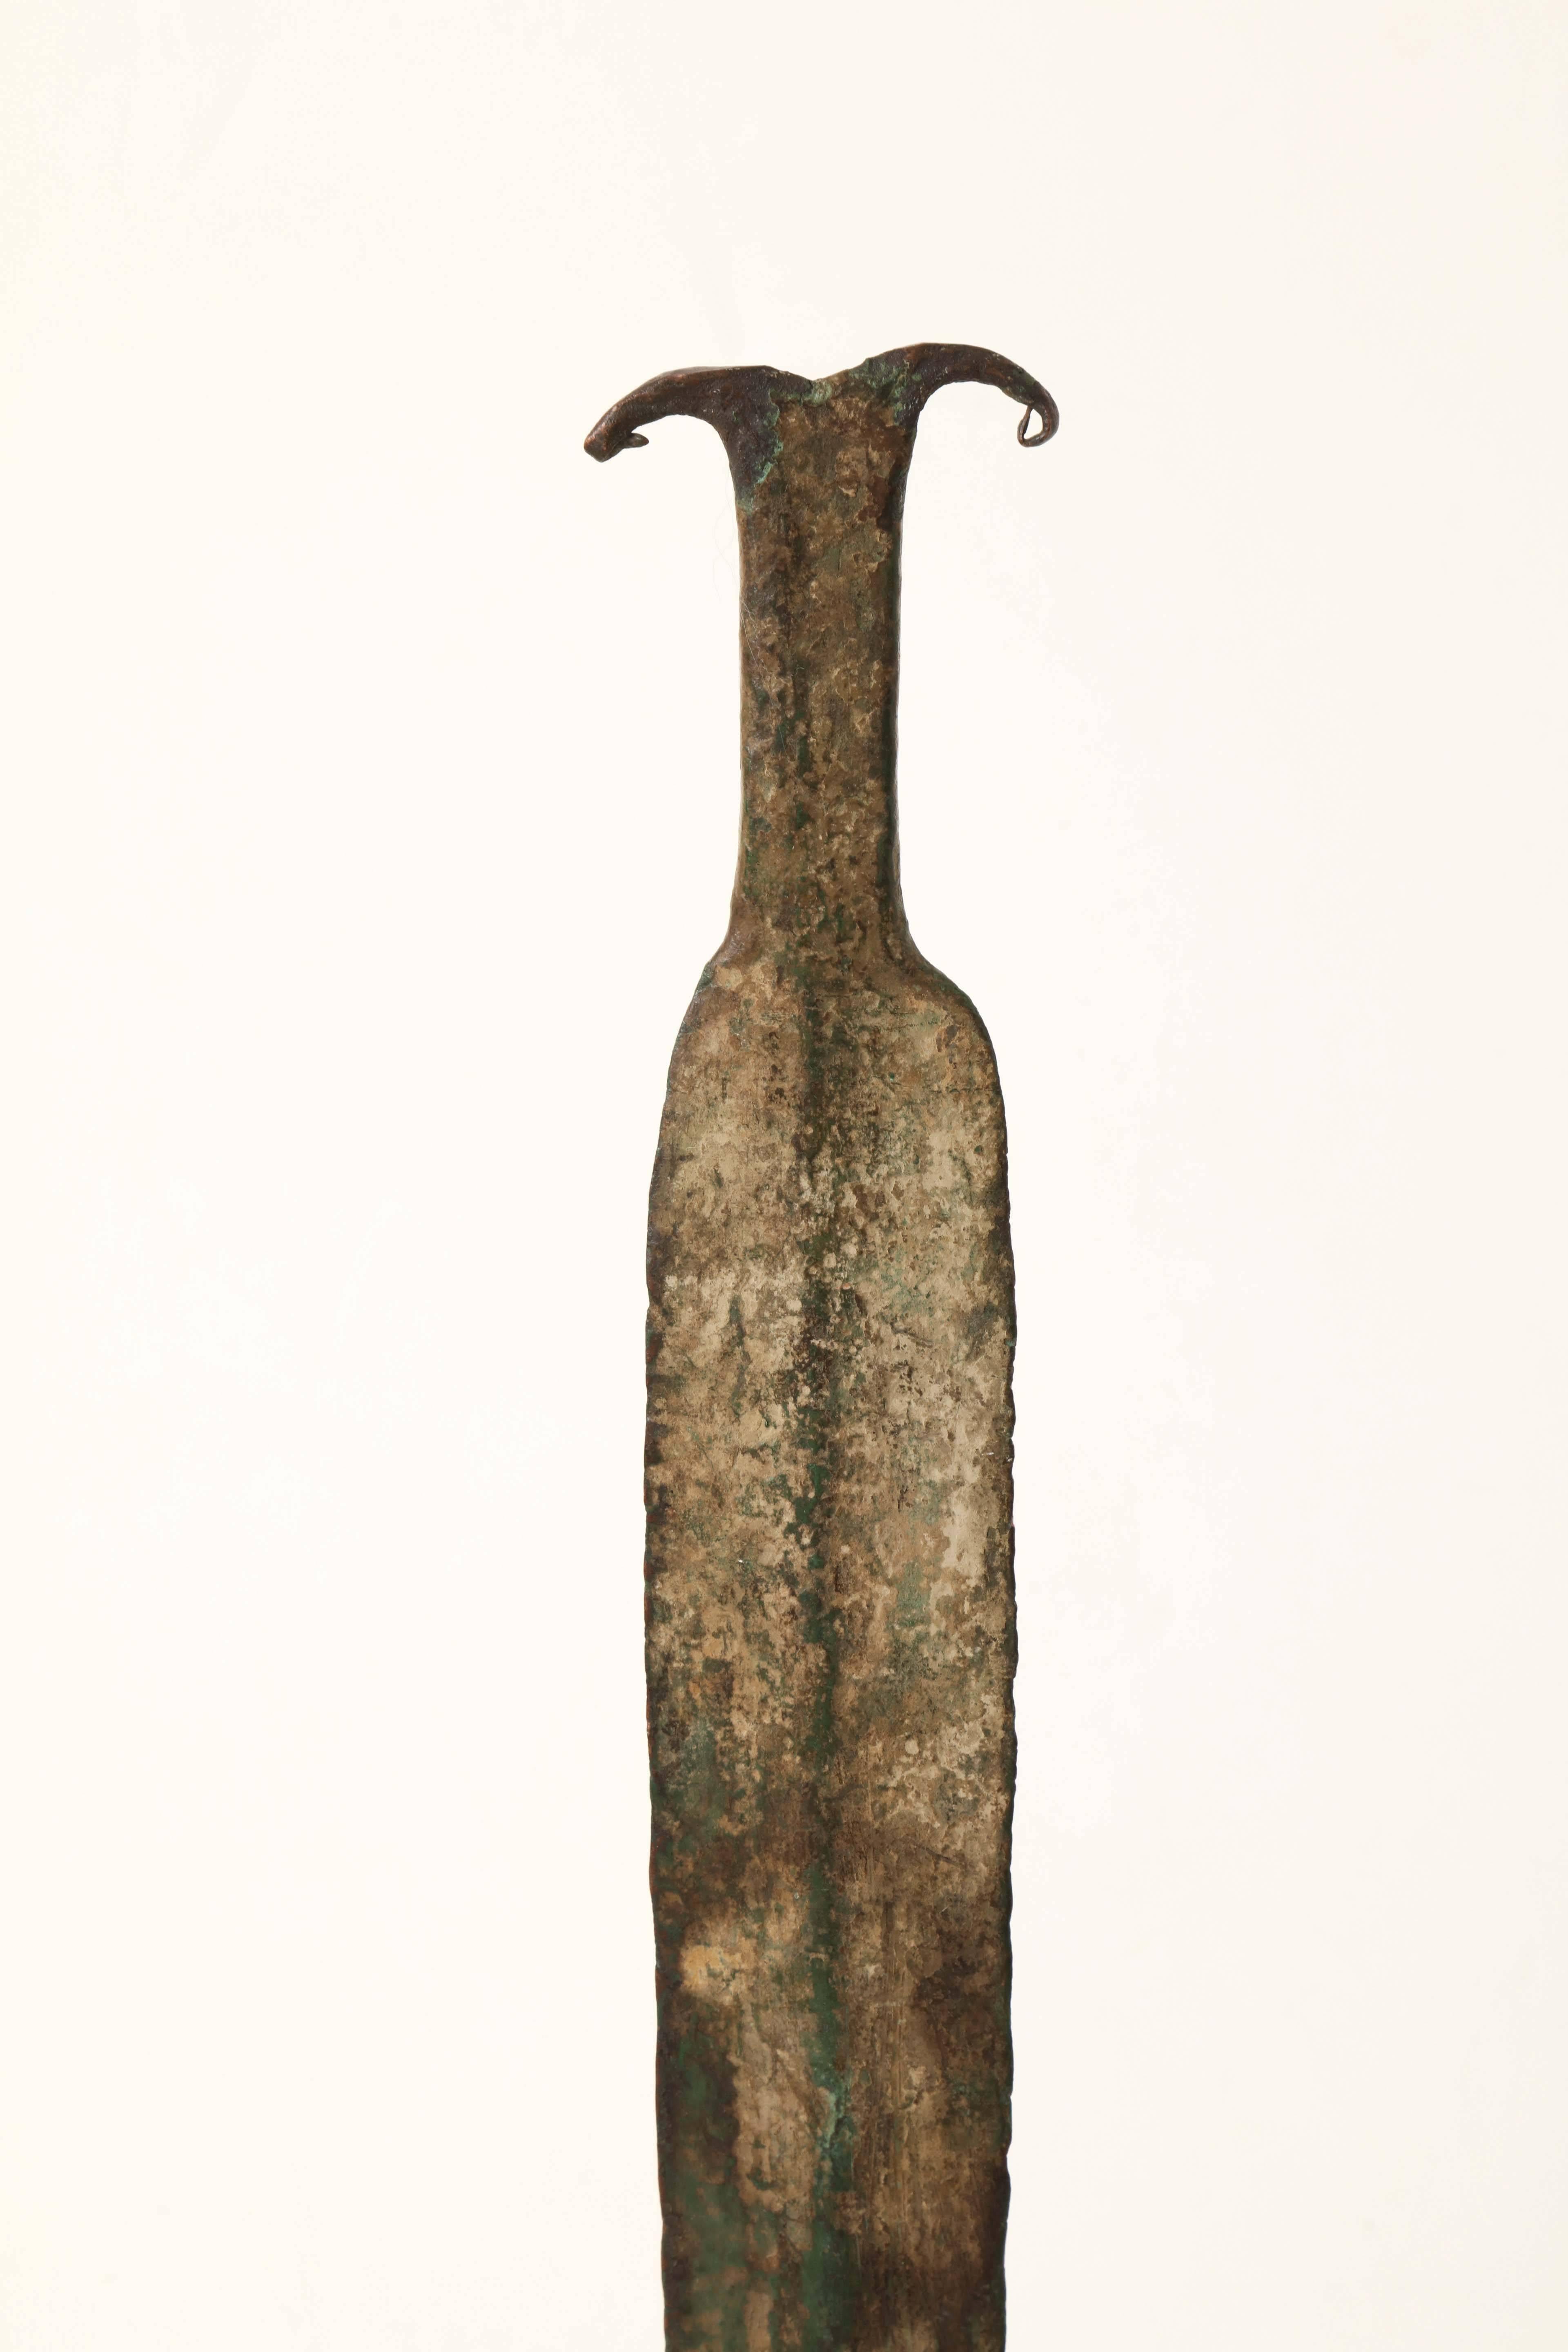 An ancient bronze sword, first millennium BC, mounted on a contemporary stand.